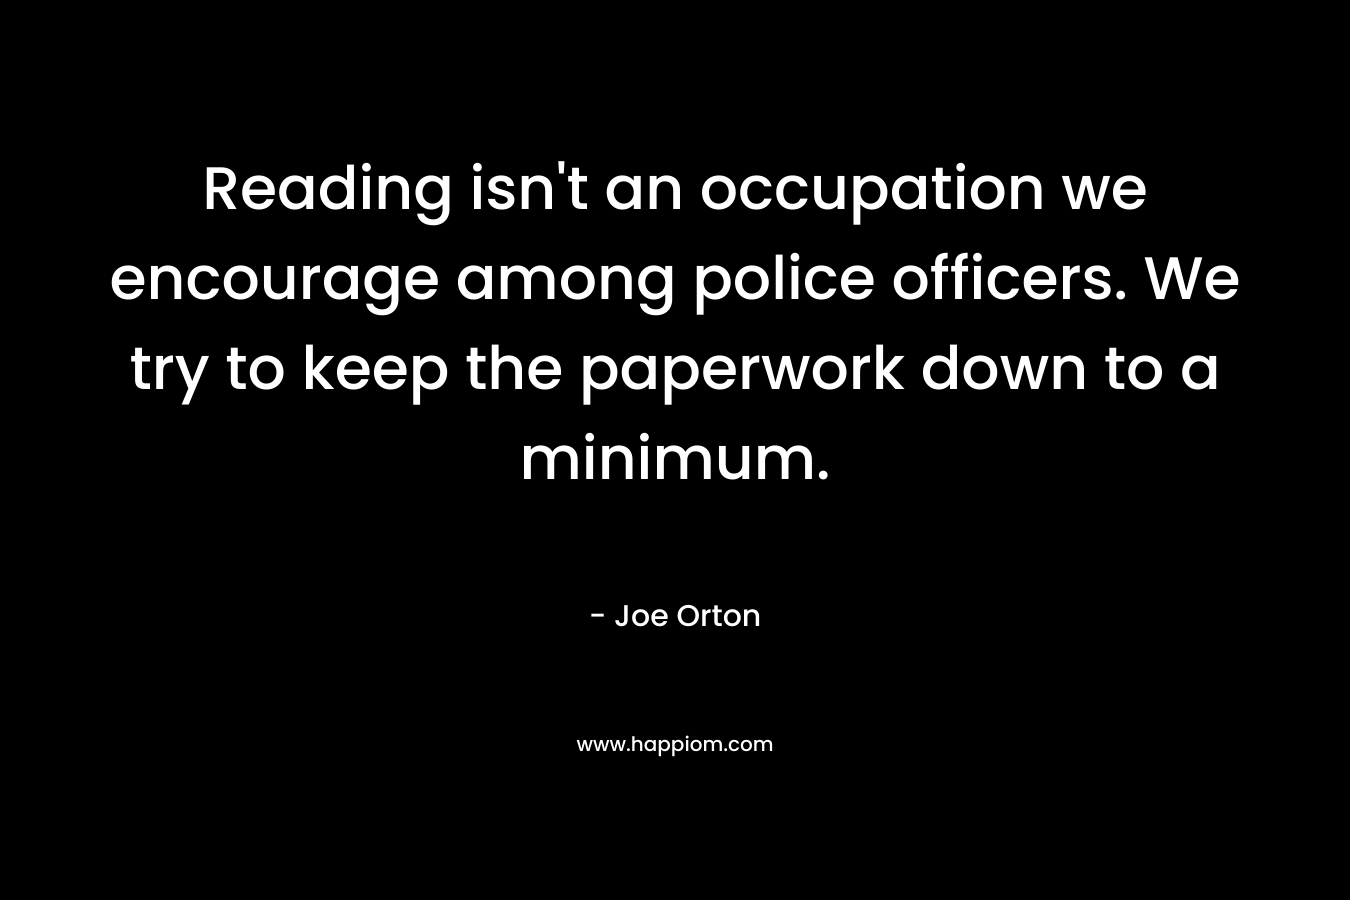 Reading isn’t an occupation we encourage among police officers. We try to keep the paperwork down to a minimum. – Joe Orton